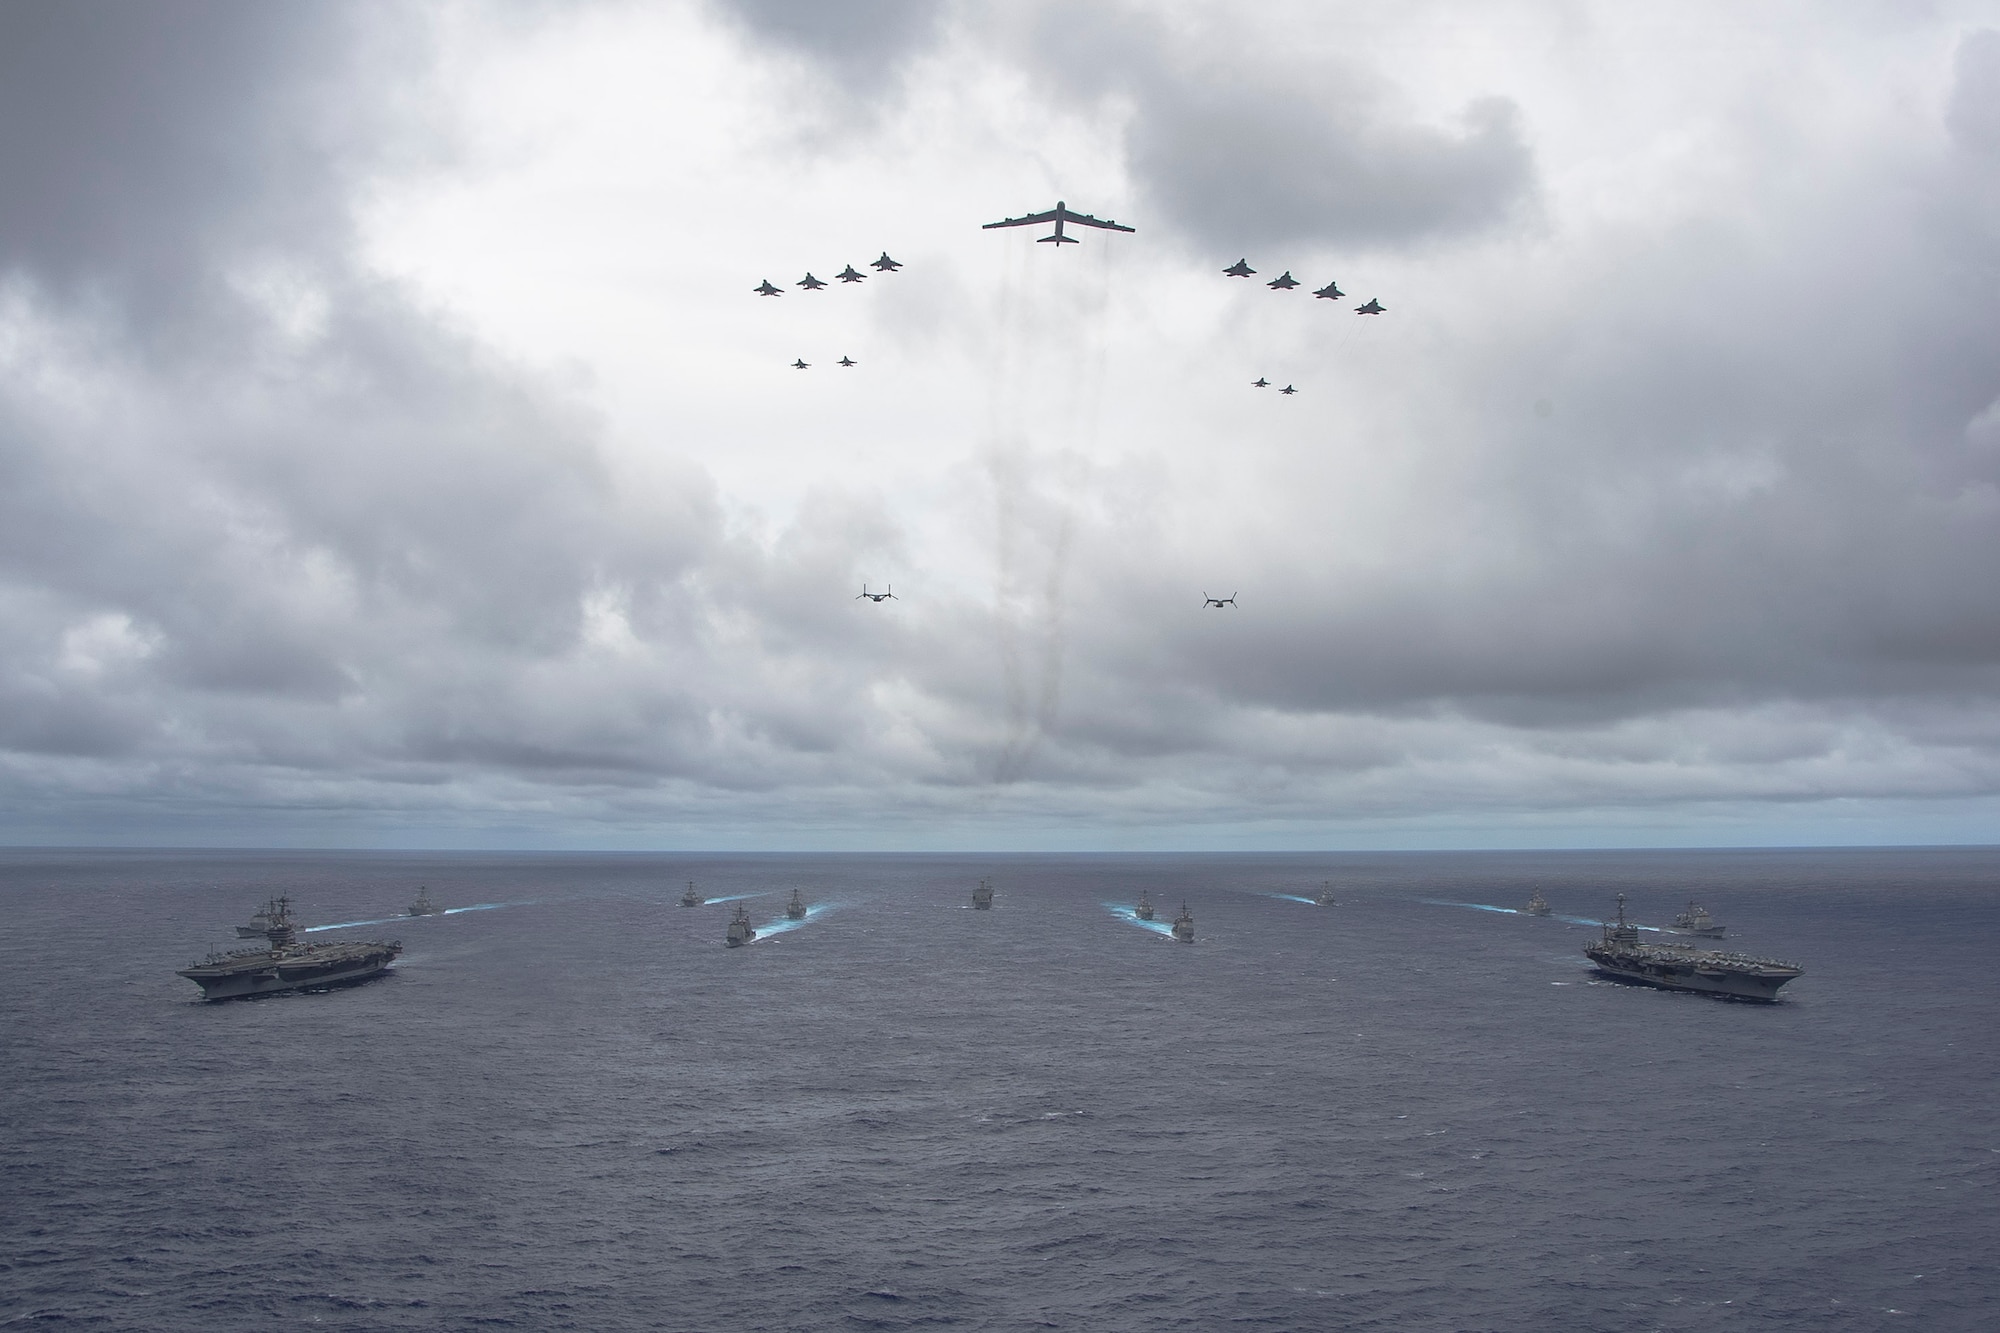 U.S. Navy ships from the George Washington and Carl Vinson Carrier Strike Groups and U.S. Air Force and Marine Corps aircraft operate in formation Sept. 23, 2014, at the conclusion of exercise Valiant Shield 2014. Exercises like VS 14 provide the U.S. military the opportunity to integrate joint assets in an air-sea battle environment, refining the military’s ability to defend U.S. interests and those of its allies and partners in the Pacific region. (U.S. Navy photo/Mass Communication Specialist 1st Class Trevor Welsh)